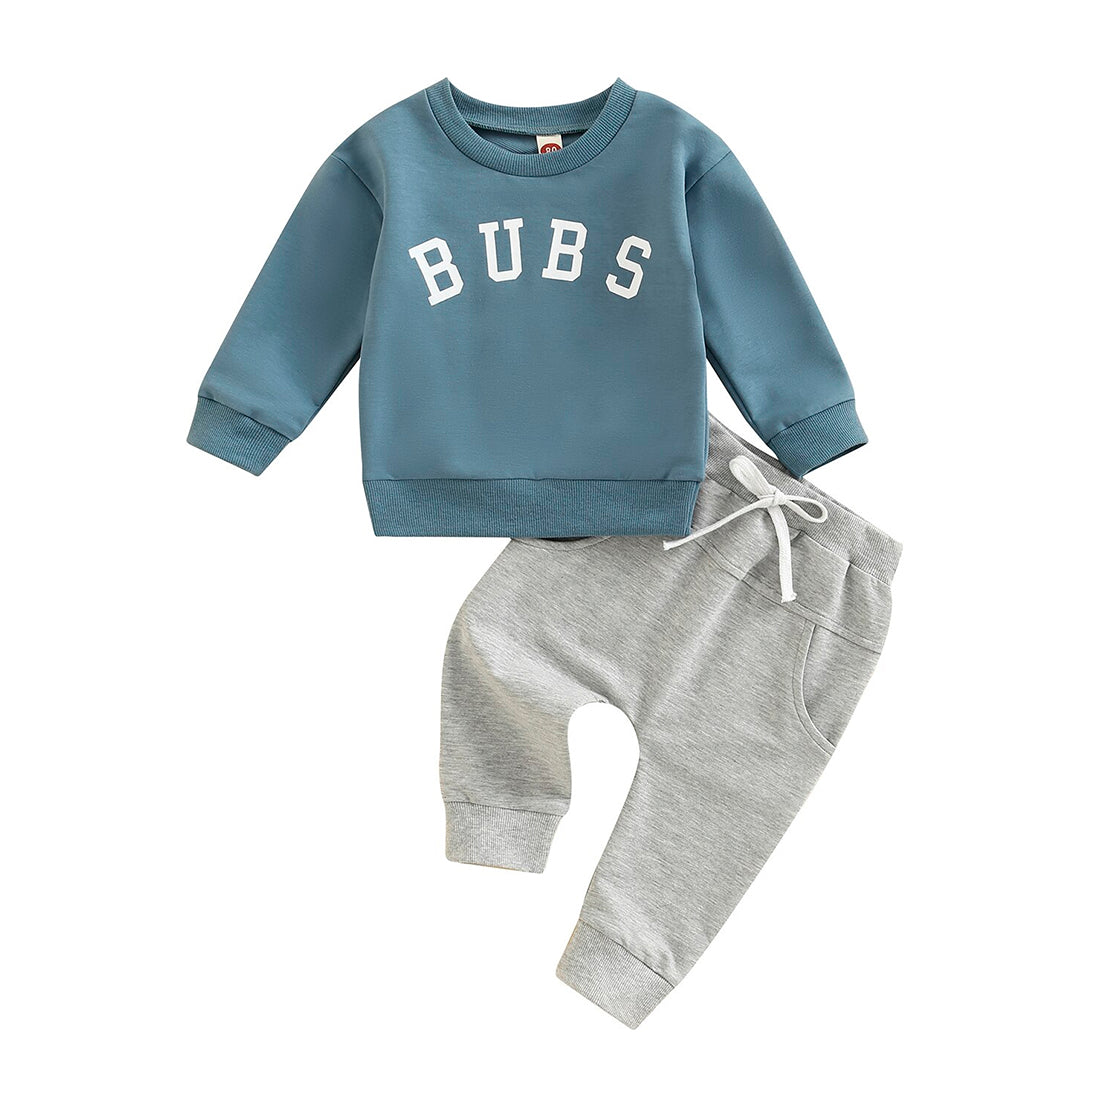 Little Boy Bubs Blue Sweatshirt 2-Piece Outfit Set – The Trendy Toddlers